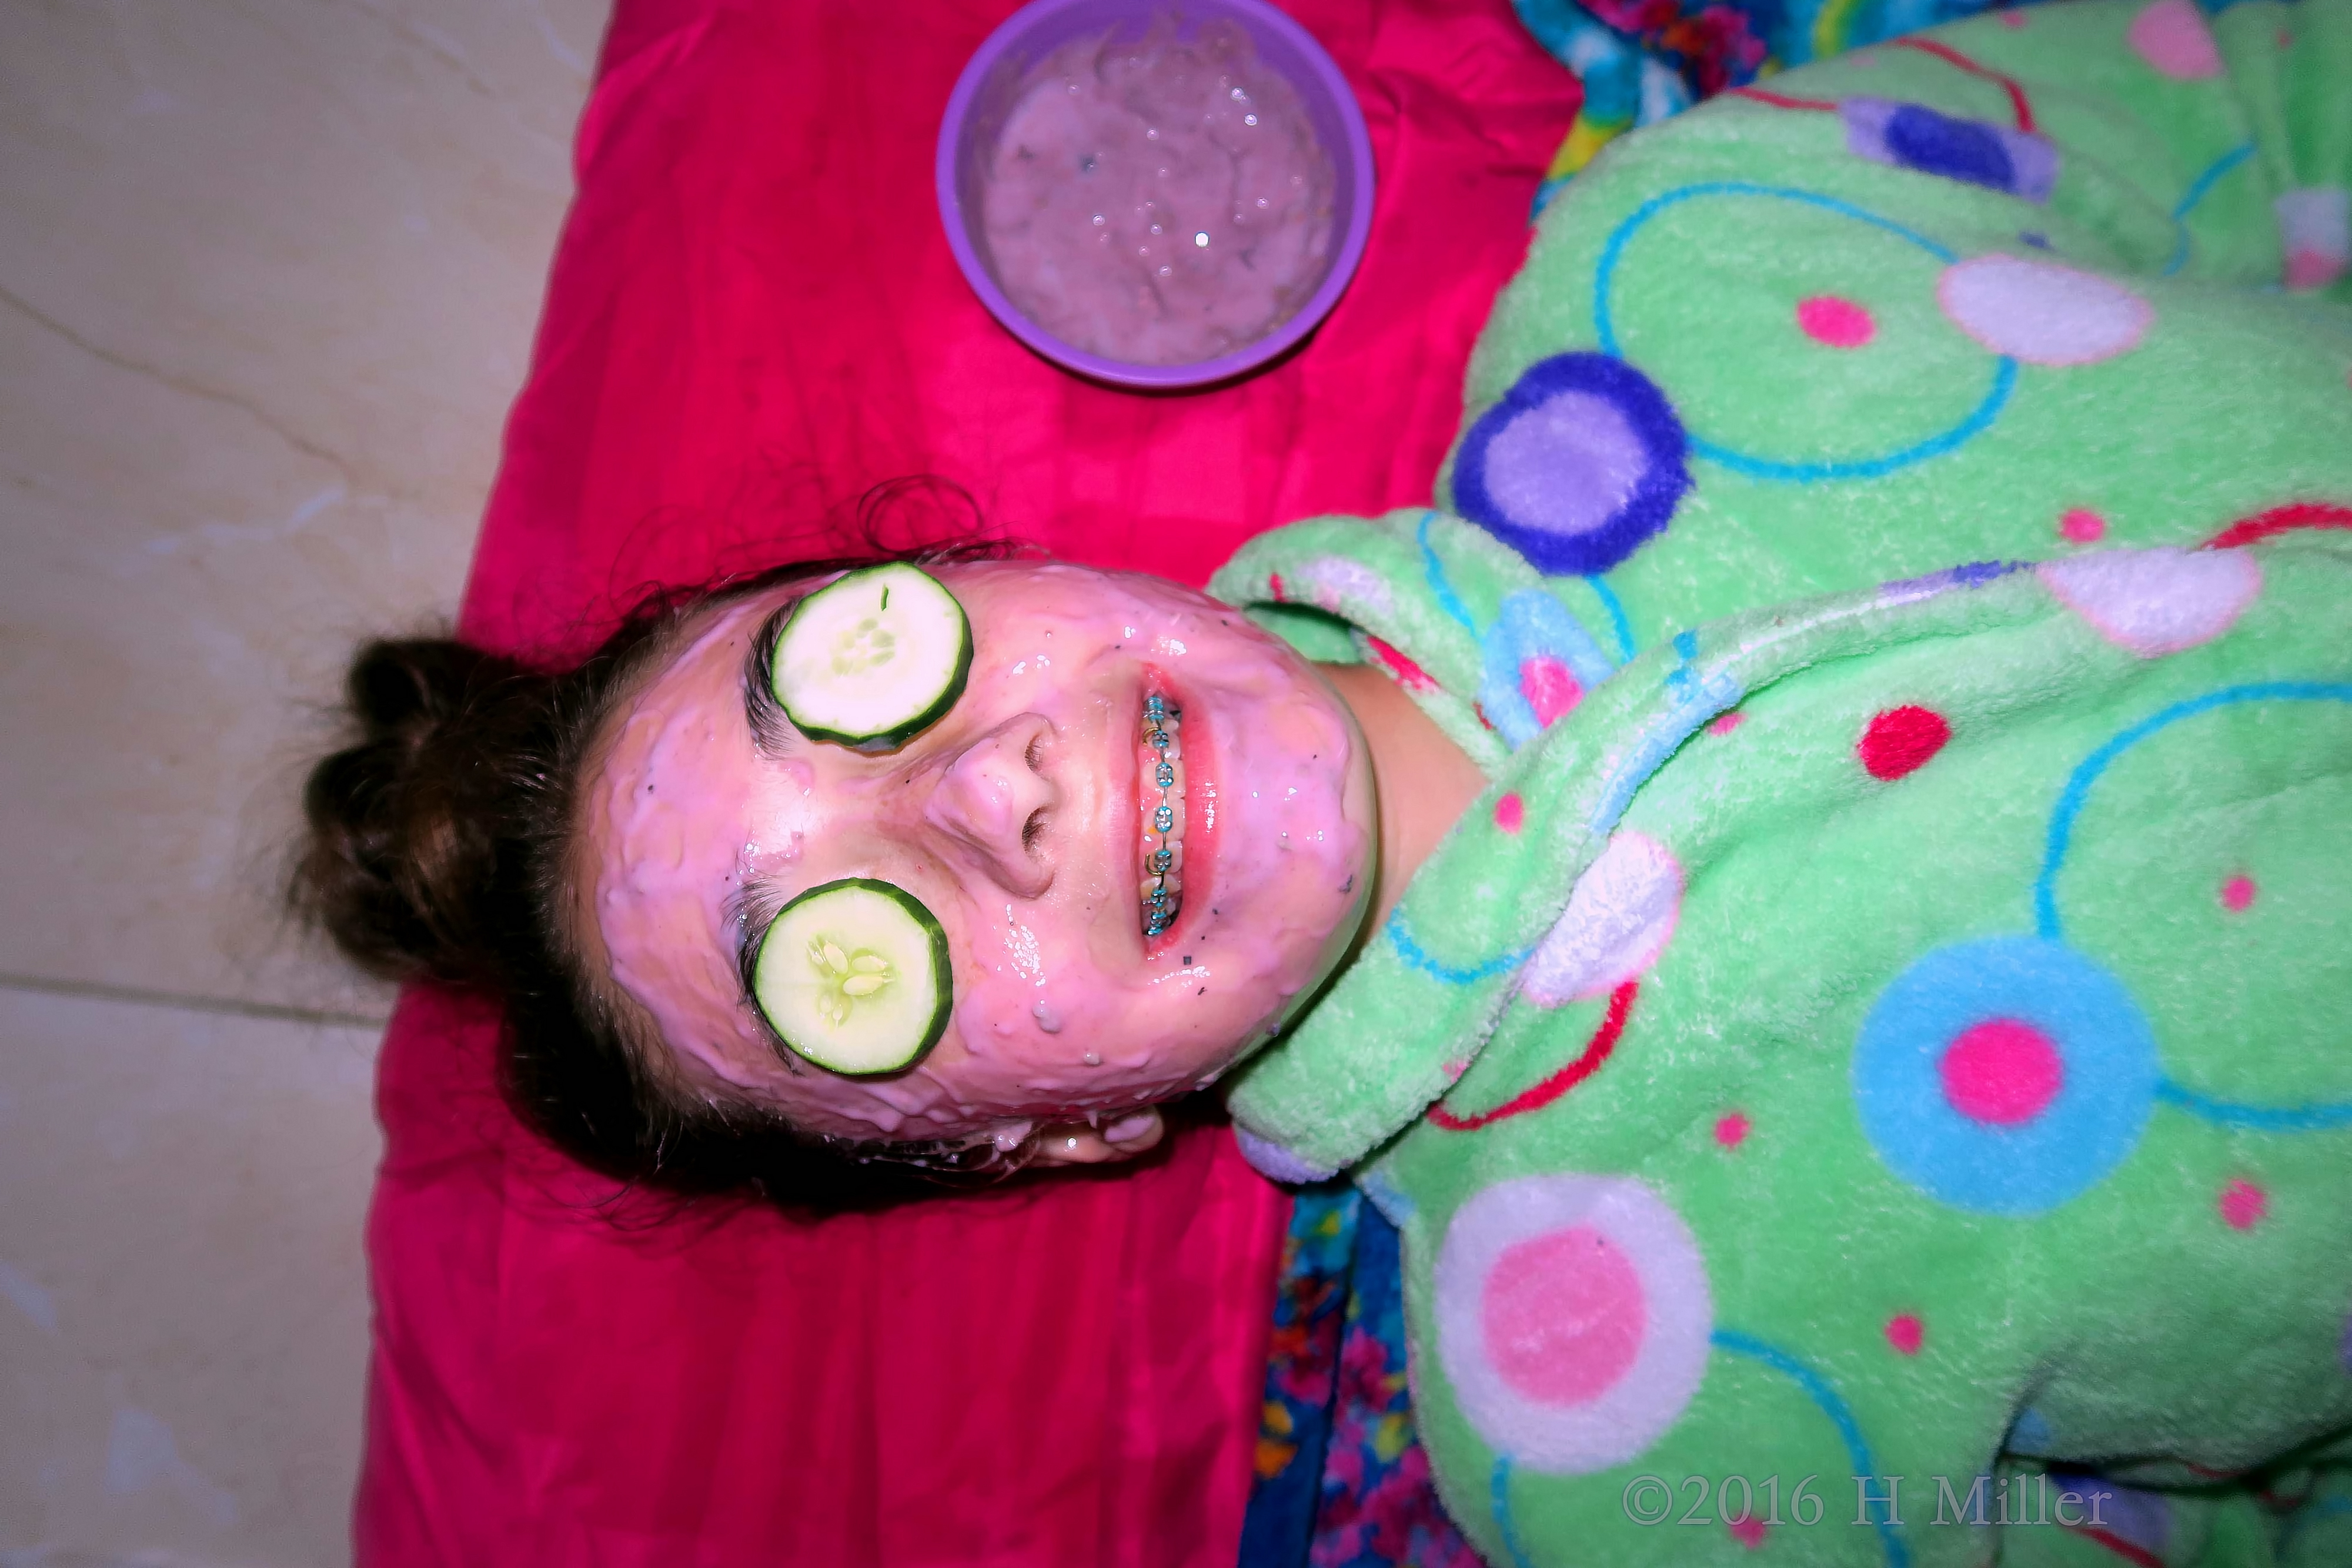 Smiling Big In A Yummy Homemade Blueberry Face Mask 